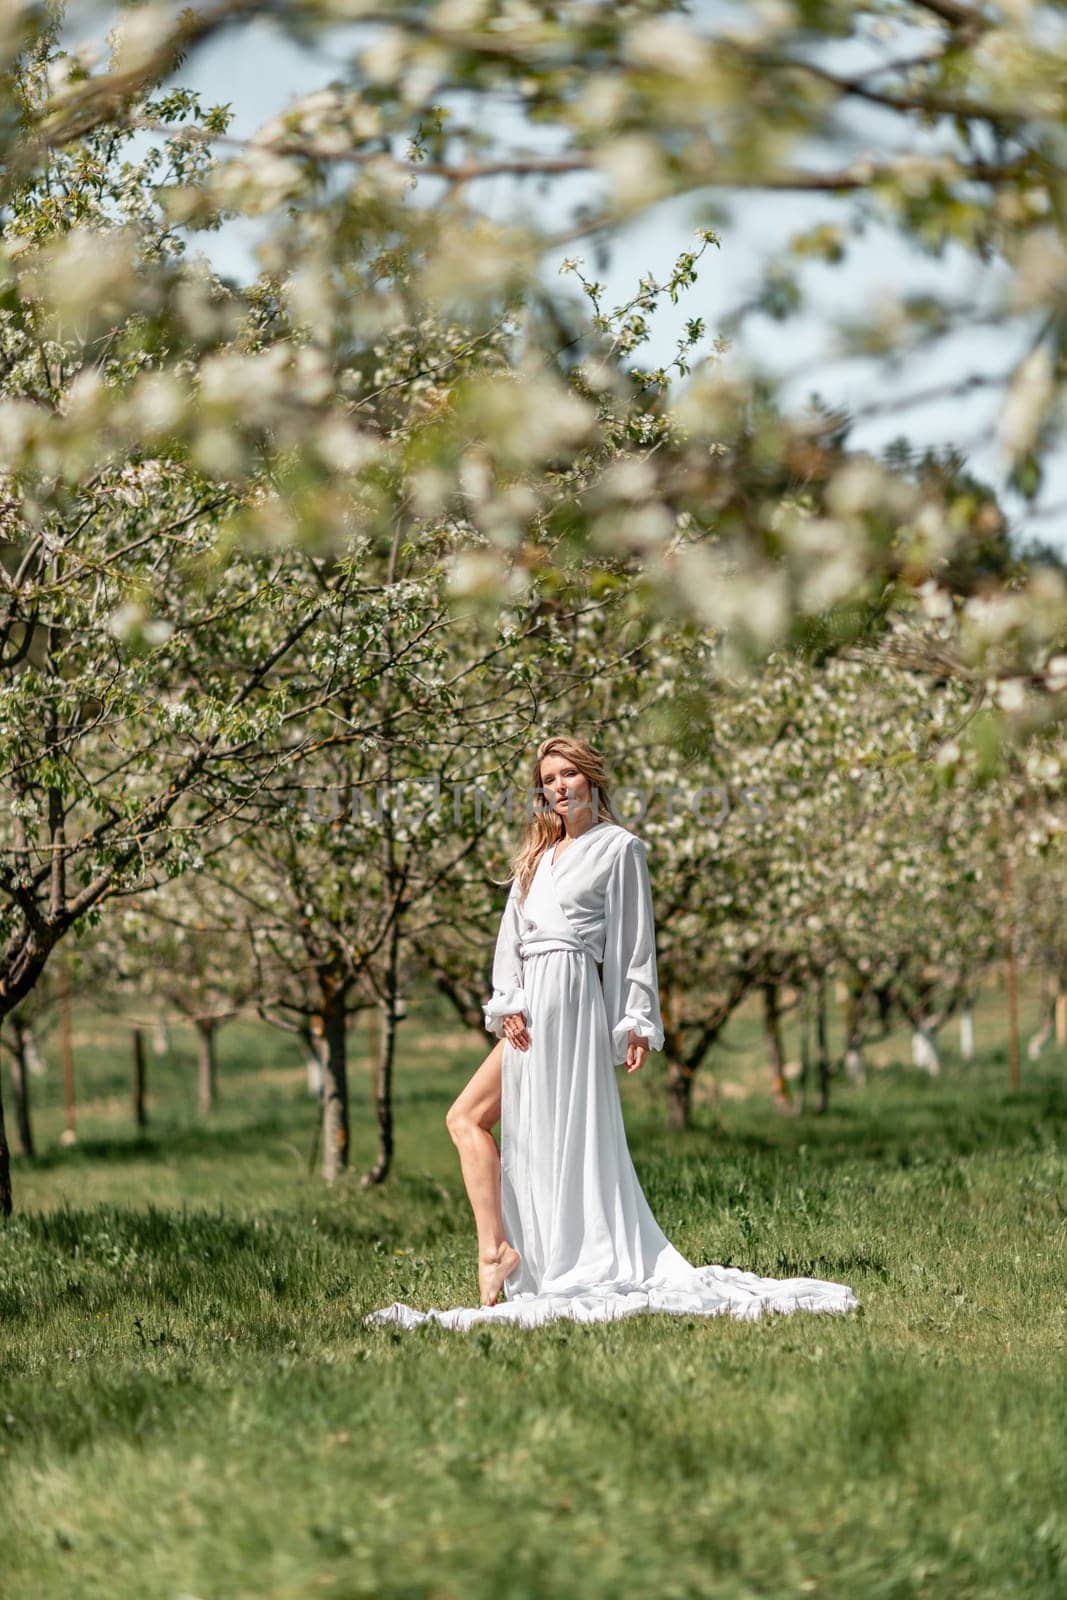 Blond blooming garden. A woman in a white dress walks through a blossoming cherry orchard. Long dress flies to the sides